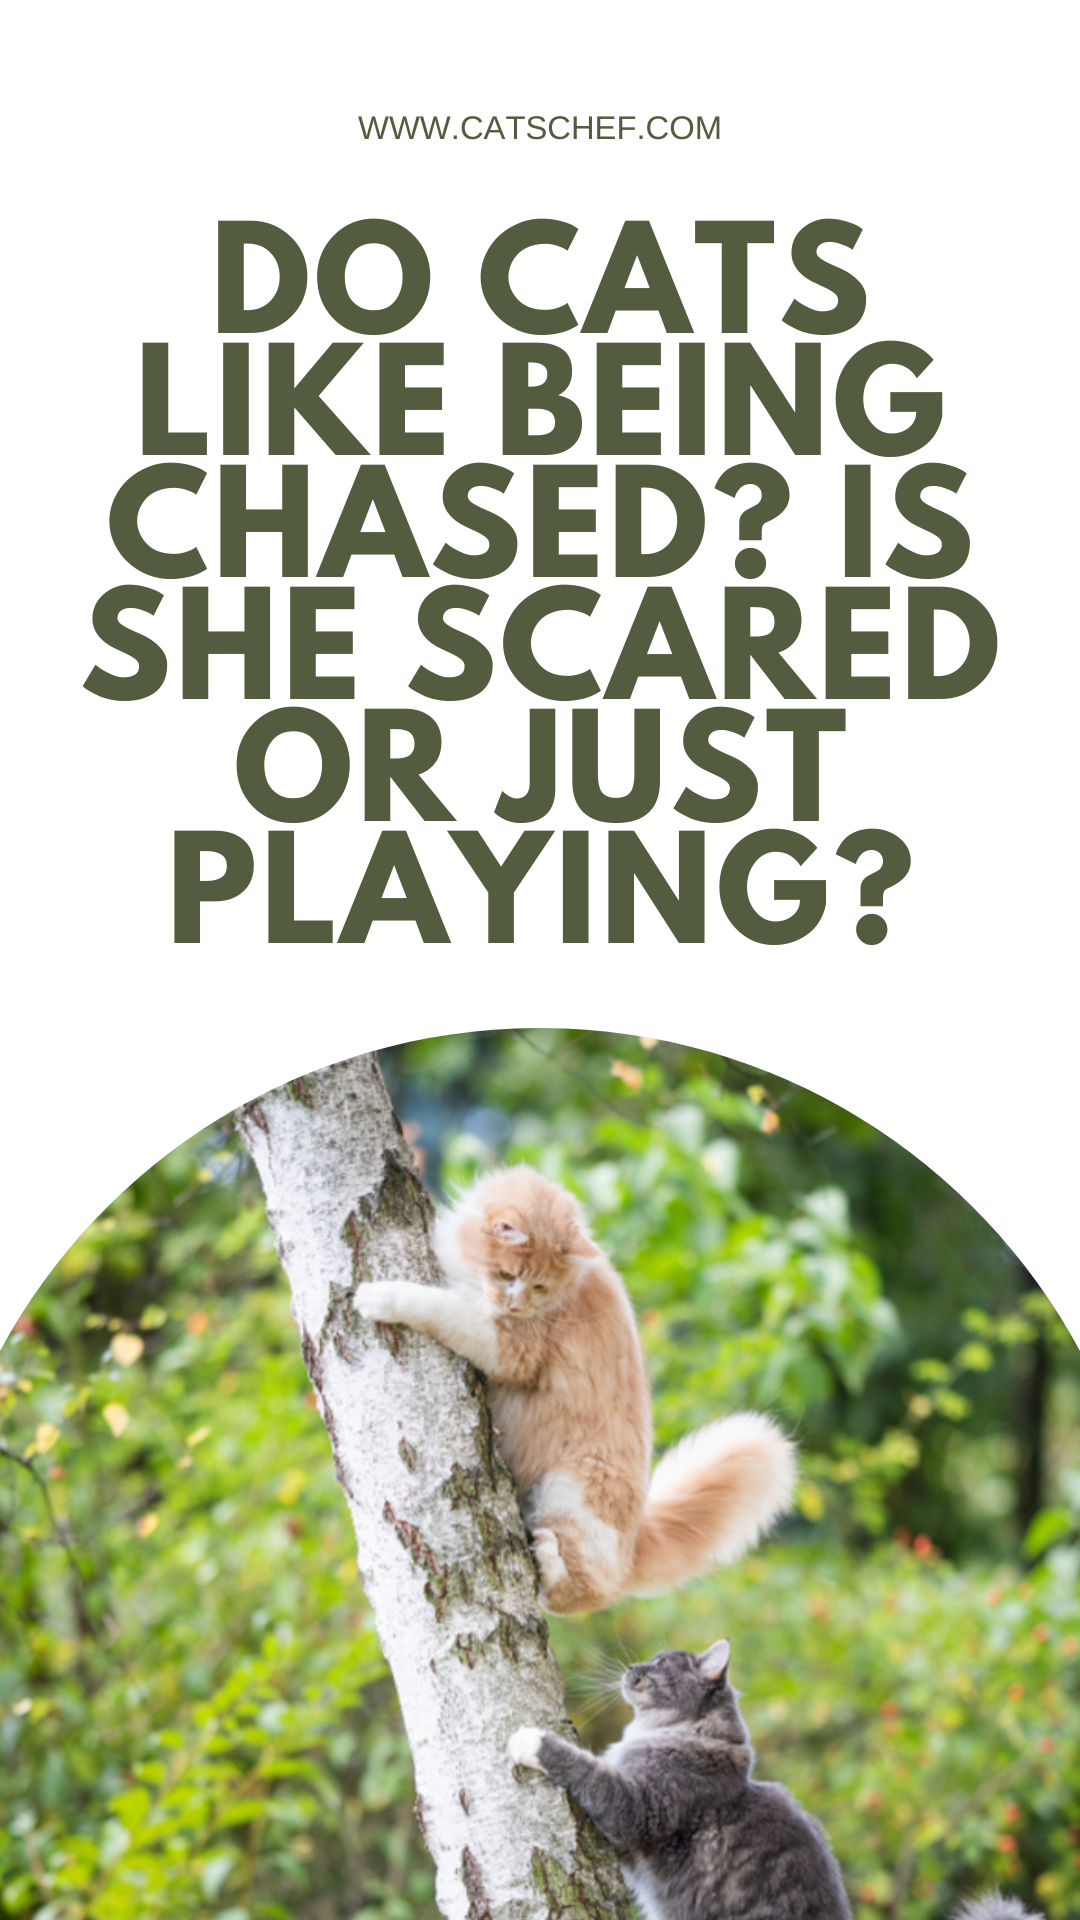 Do Cats Like Being Chased? Is She Scared Or Just Playing?